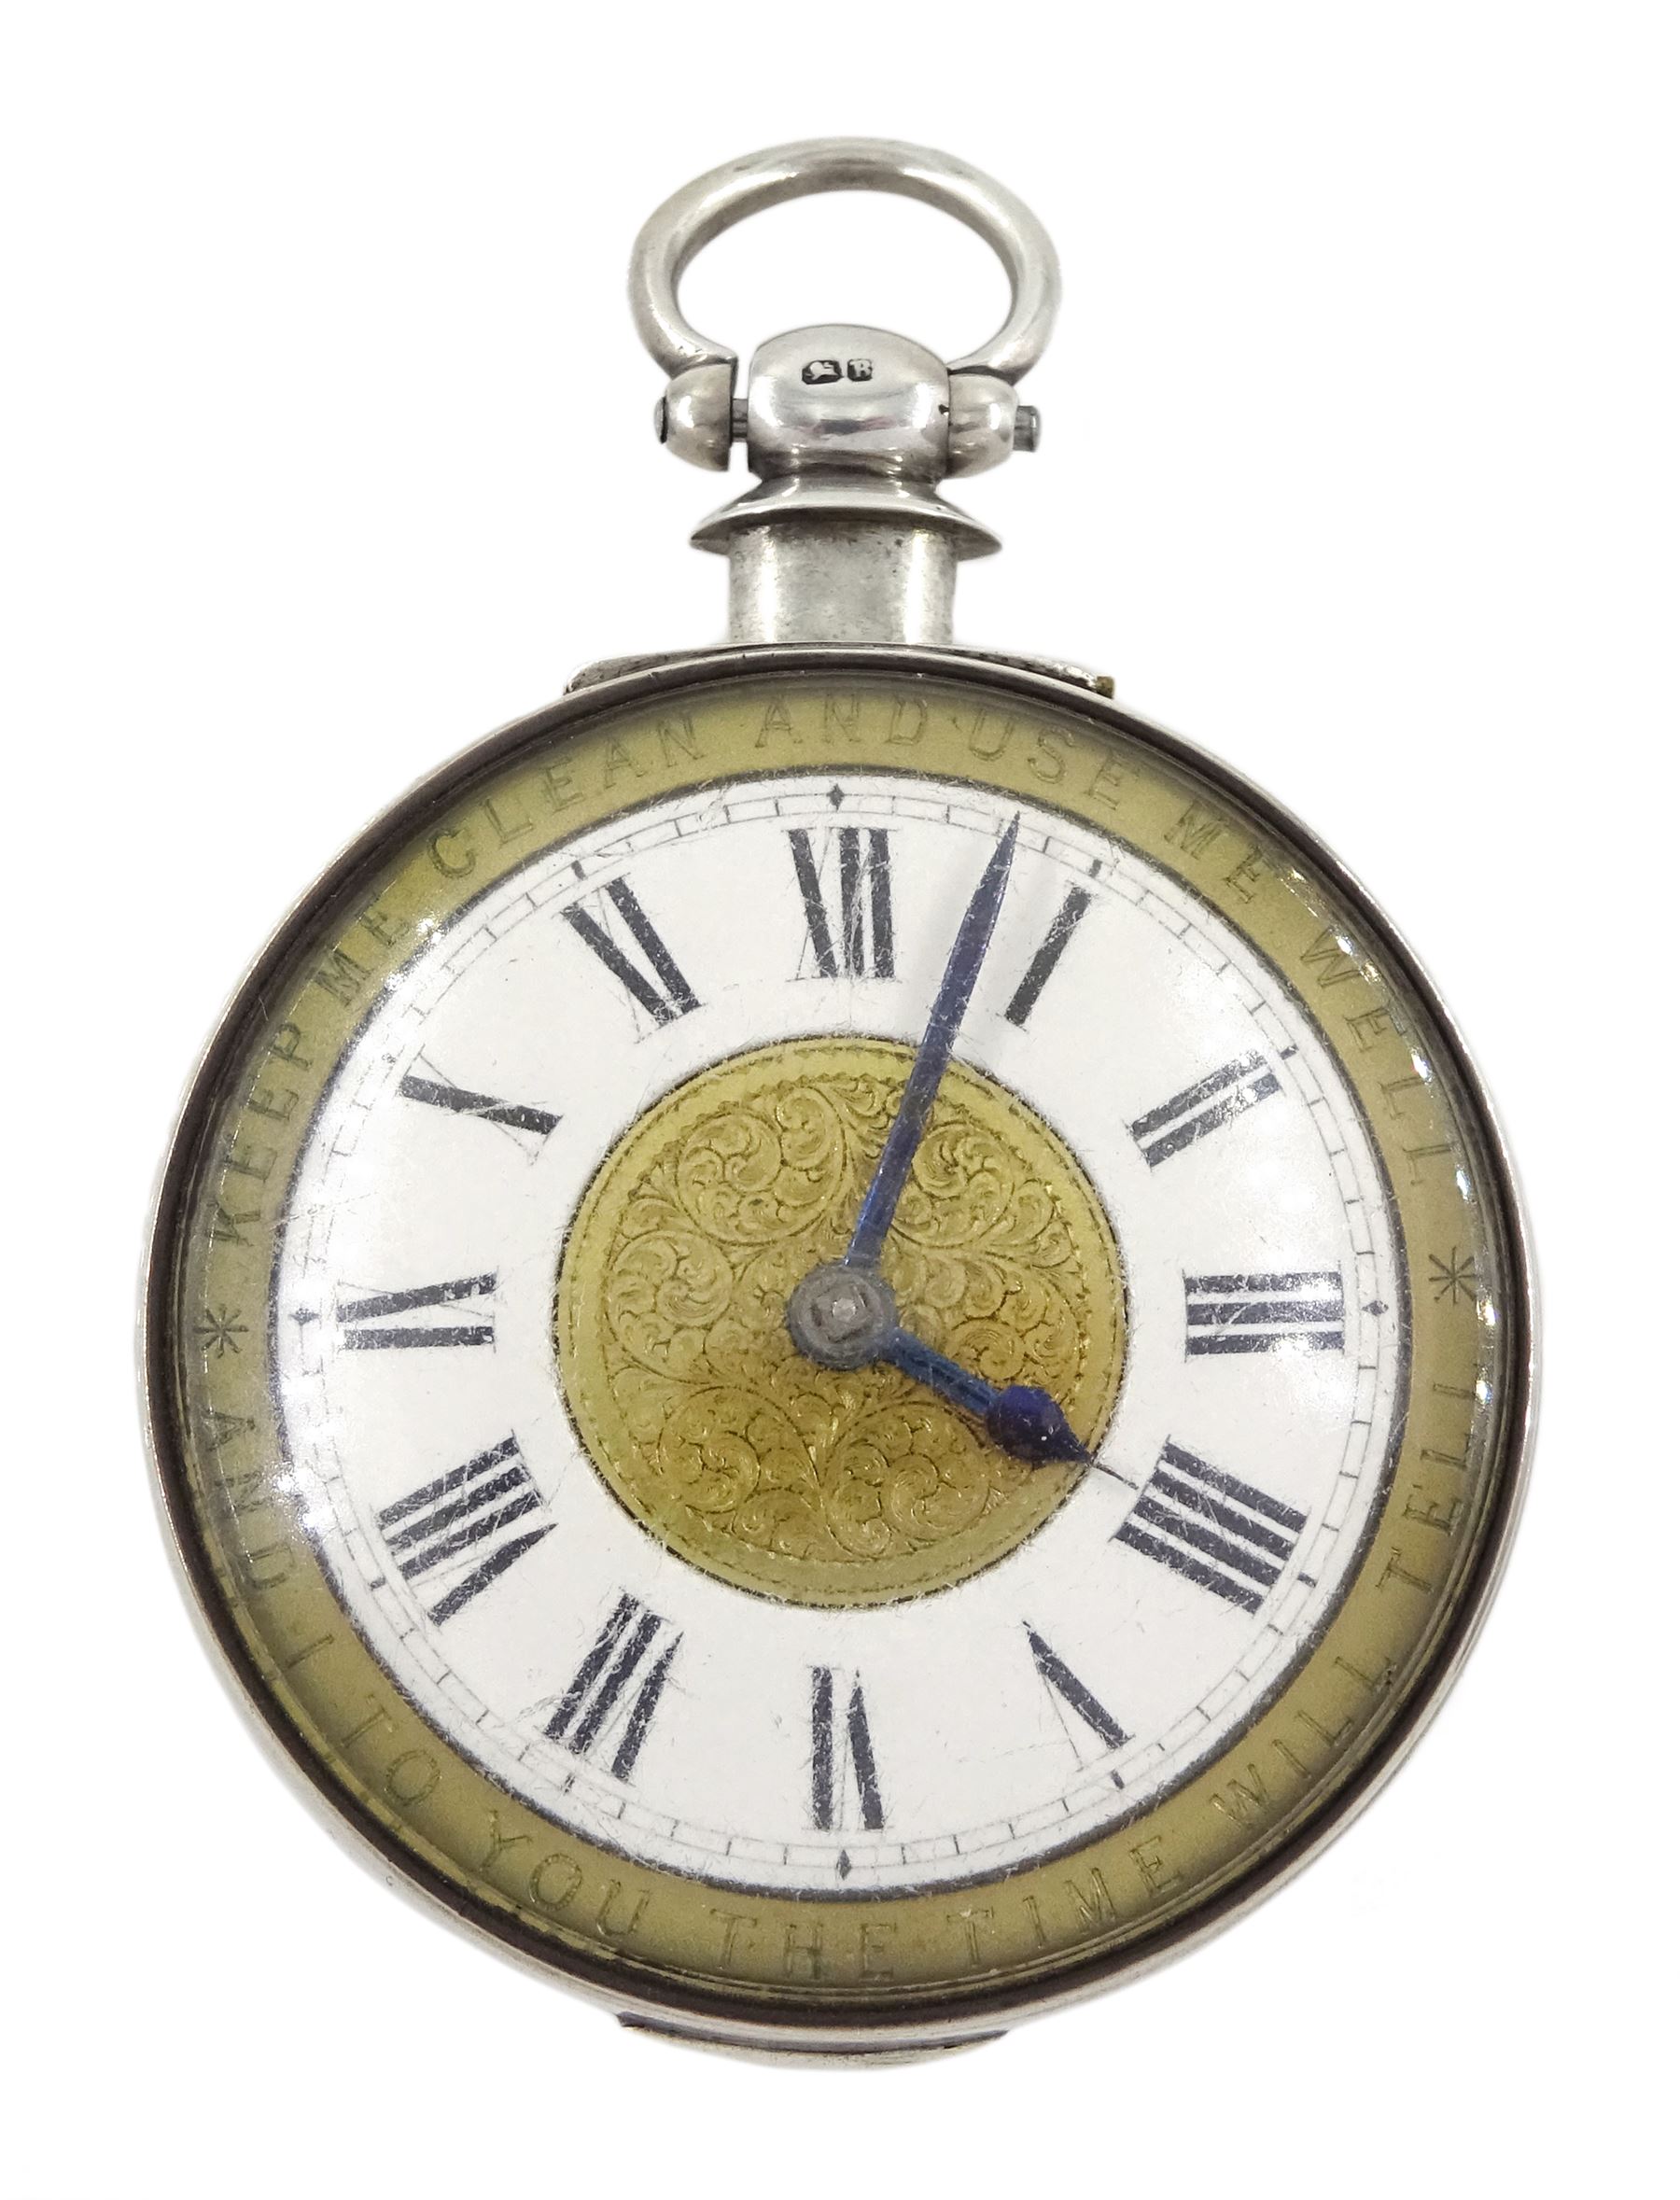 Victorian silver pair cased verge fusee pocket watch by J C Heselton - Image 3 of 6